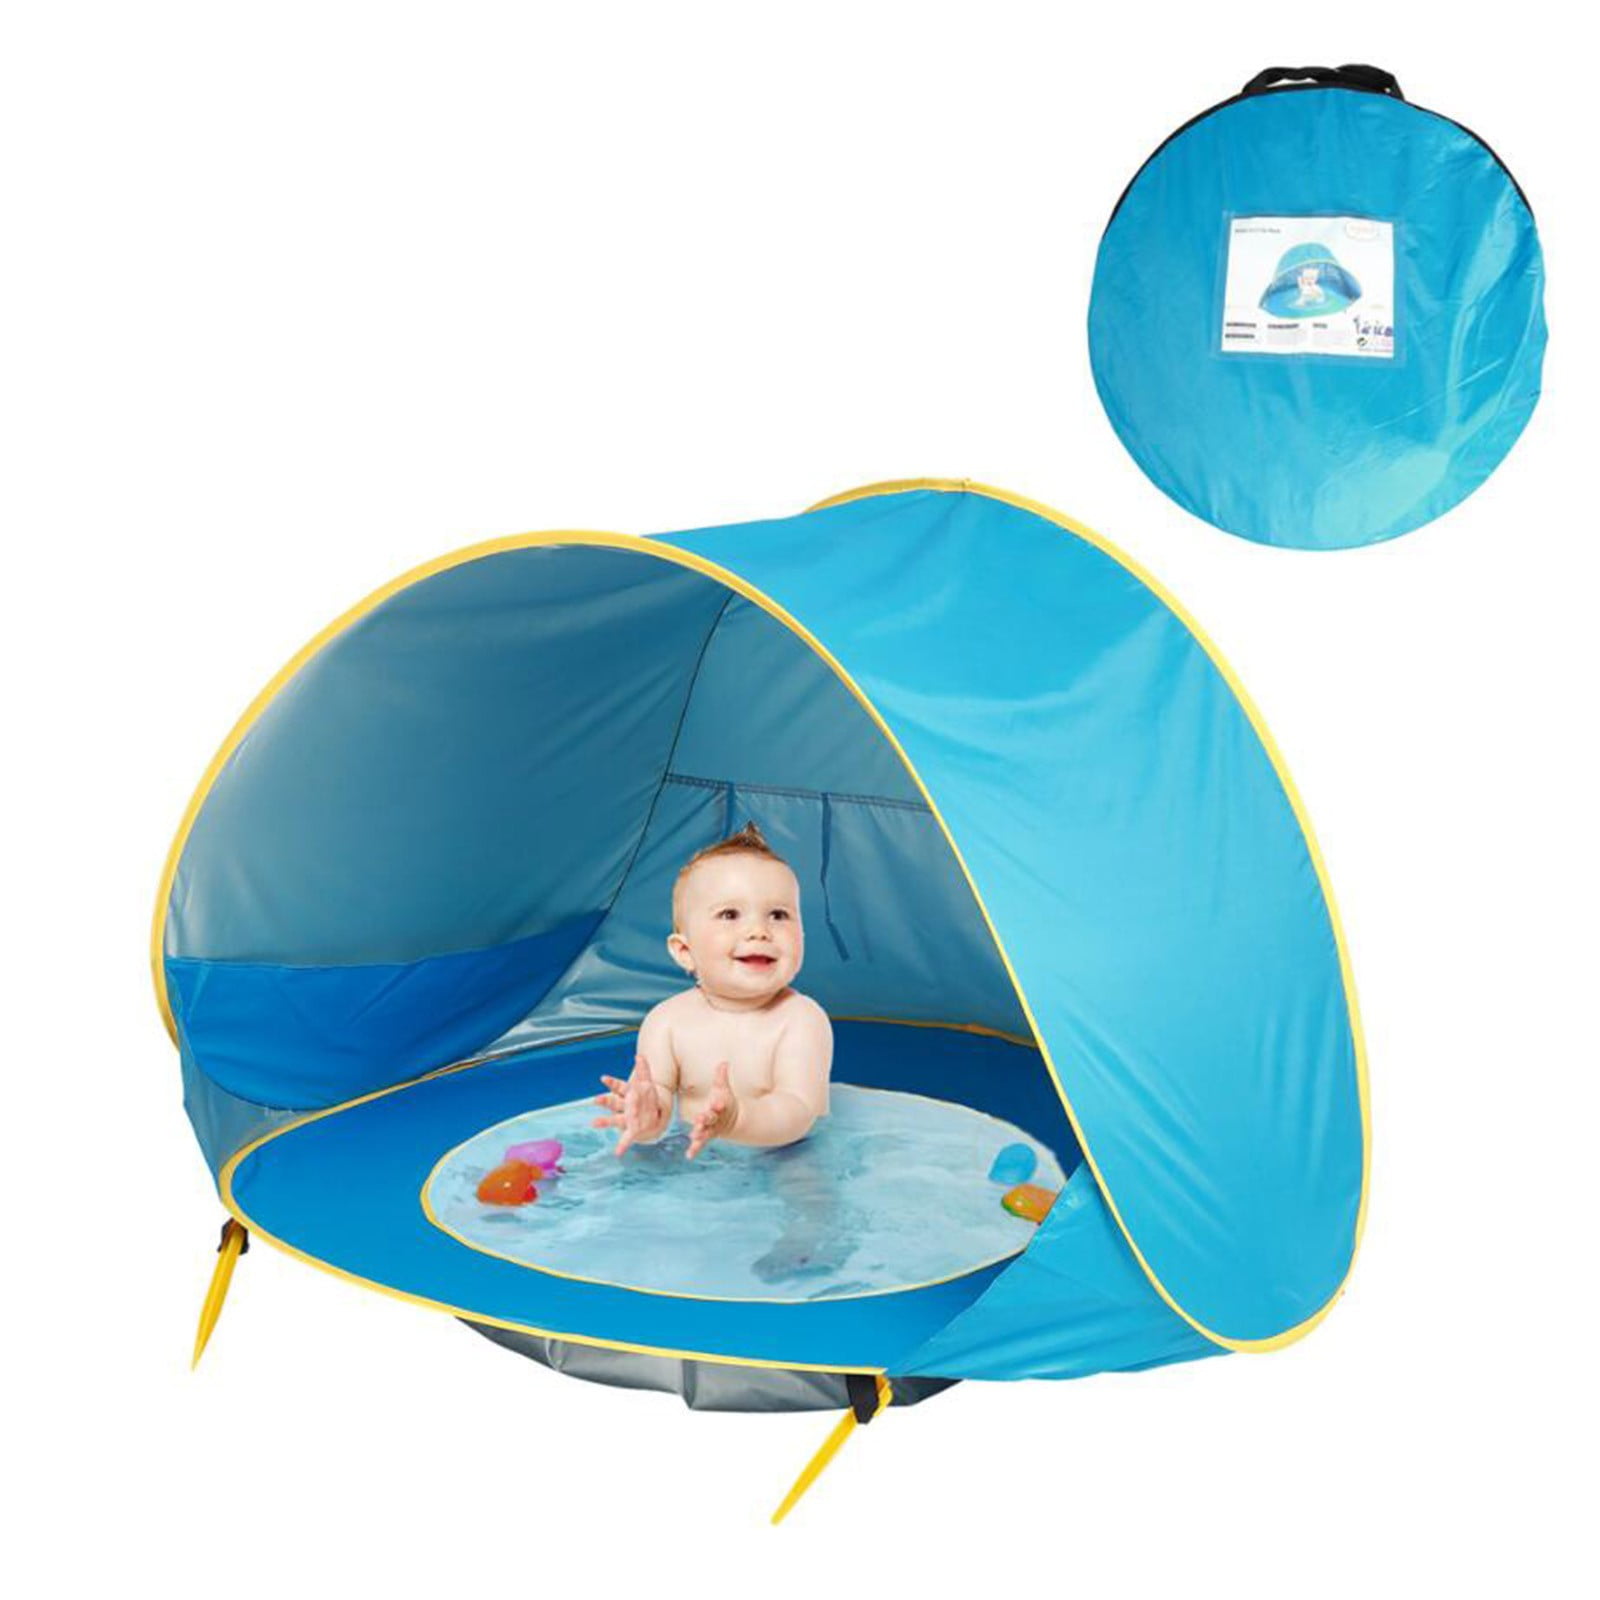 Baby Beach Tent Waterproof UV-Protecting Kids Outdoor Camping Foldable Play Pool 